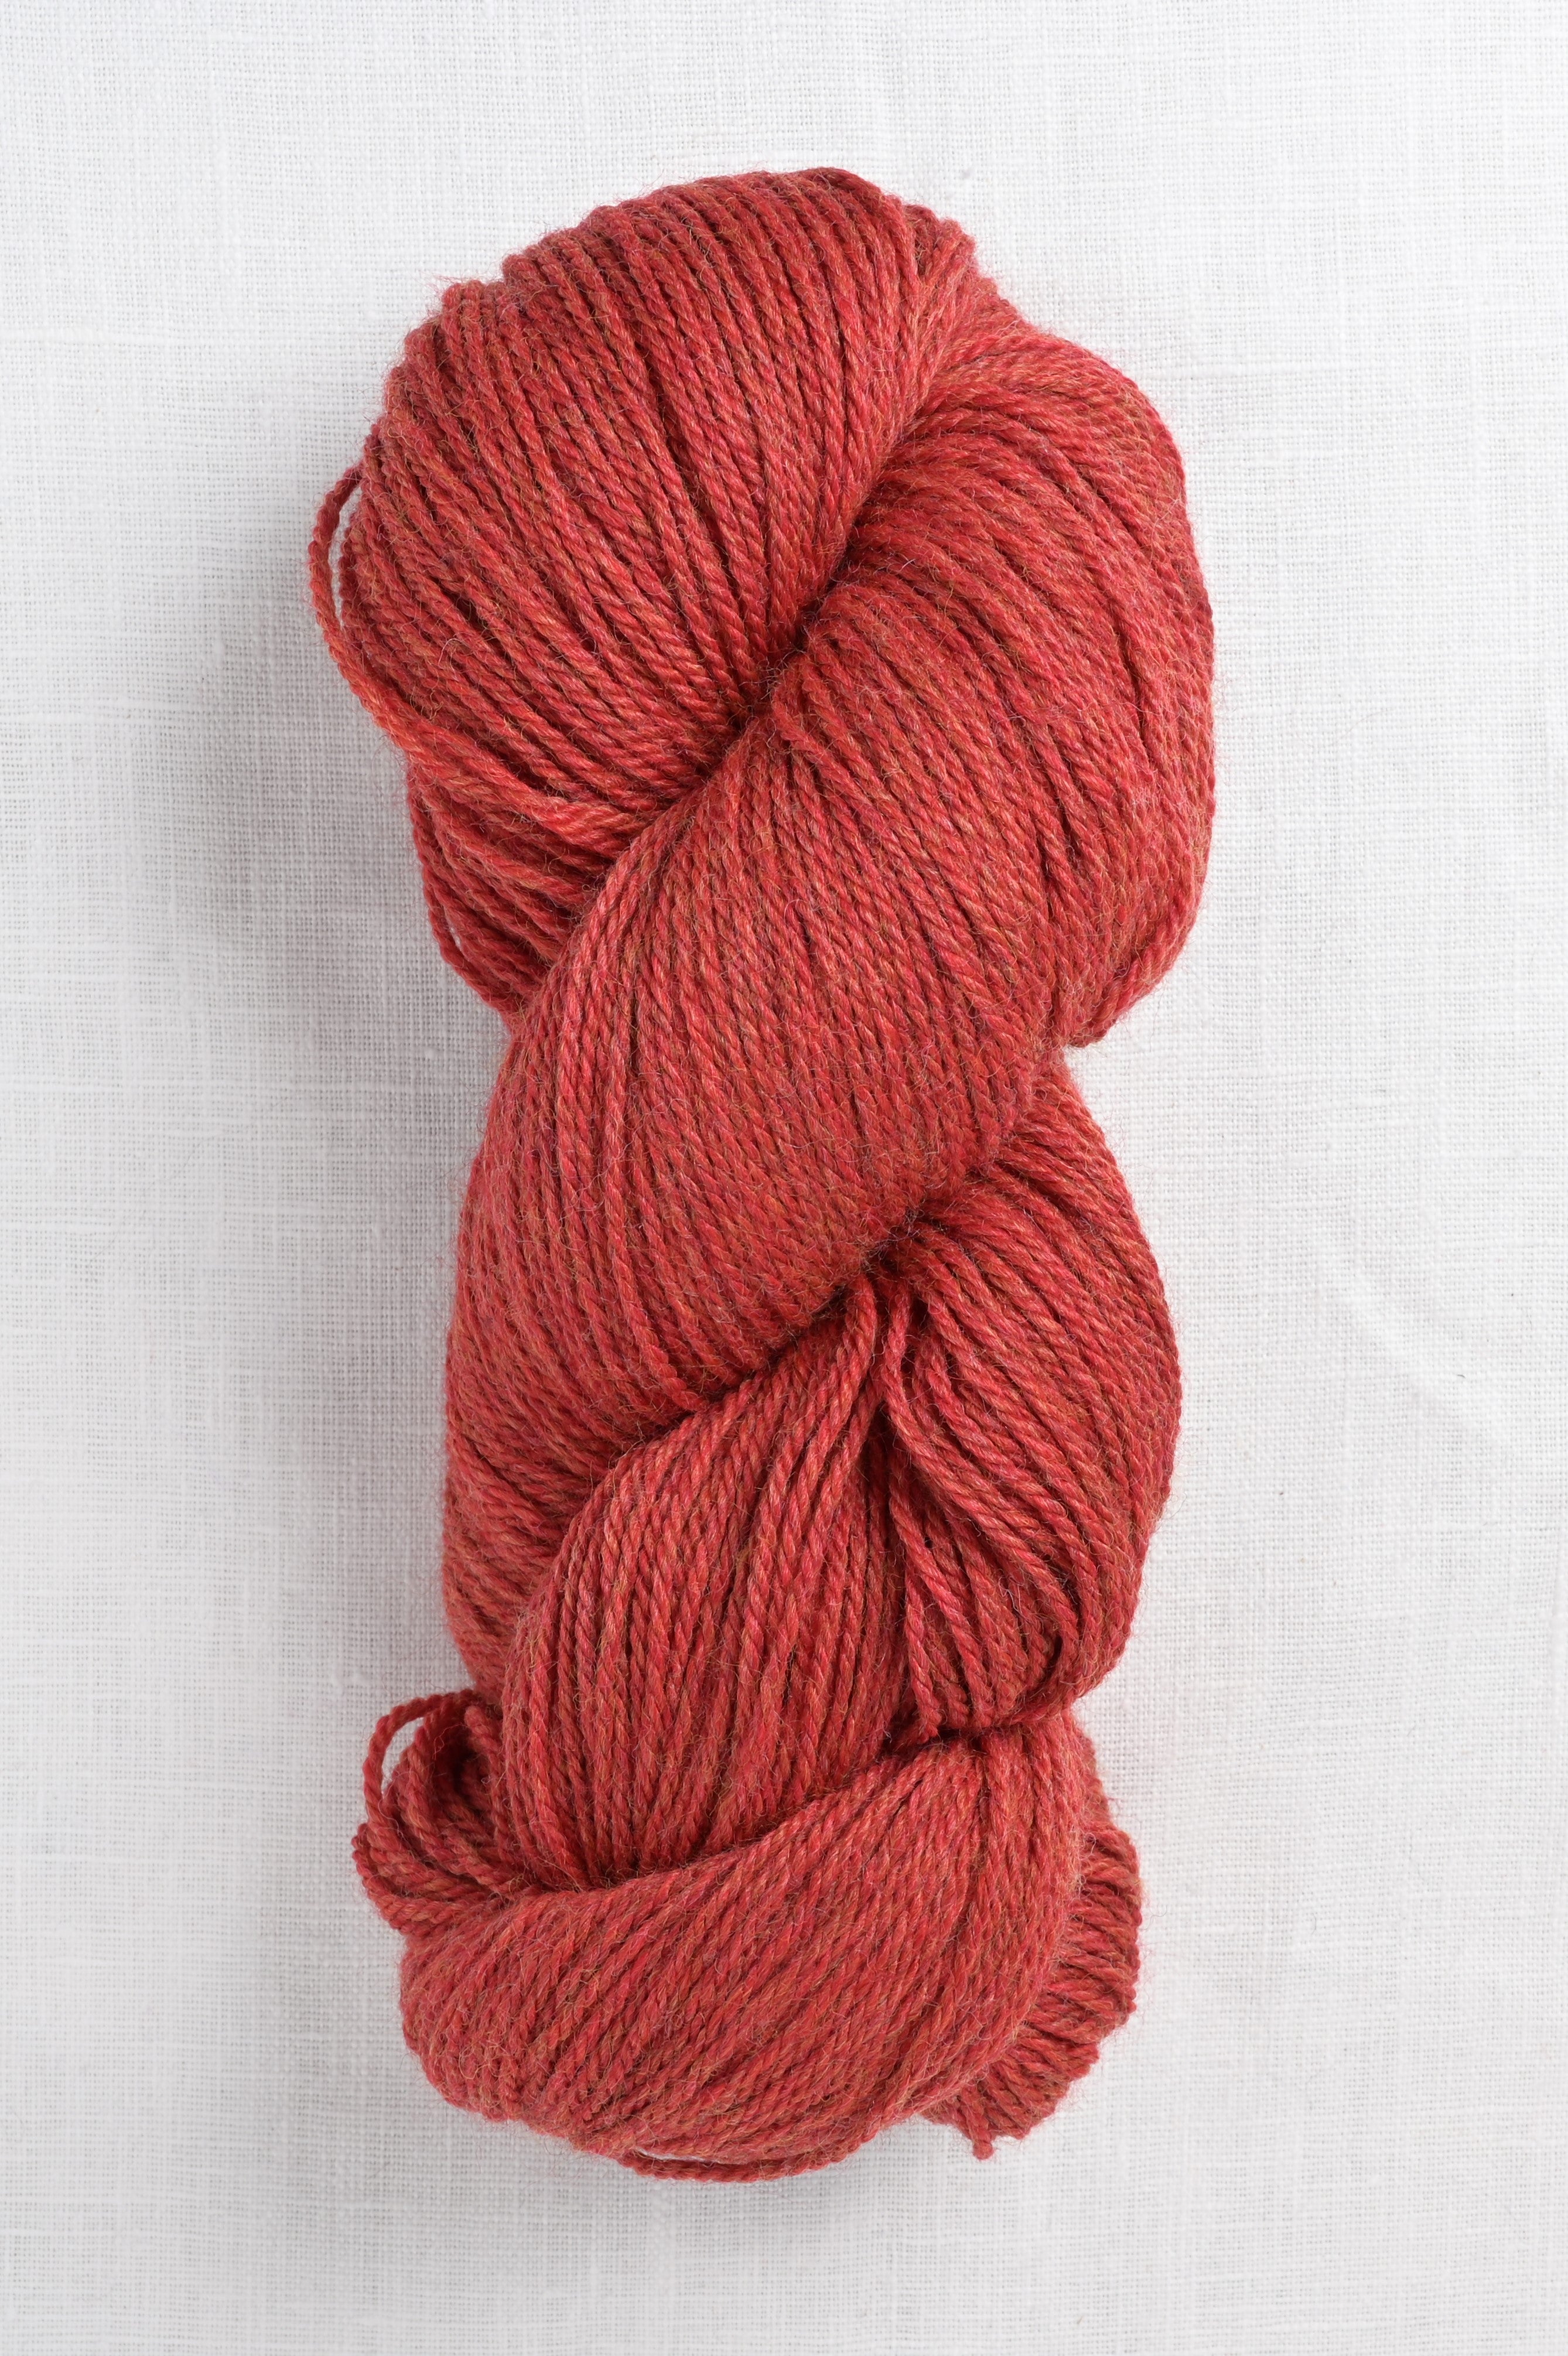 Berroco Vintage DK 2173 Company Wool Pepper and Red –